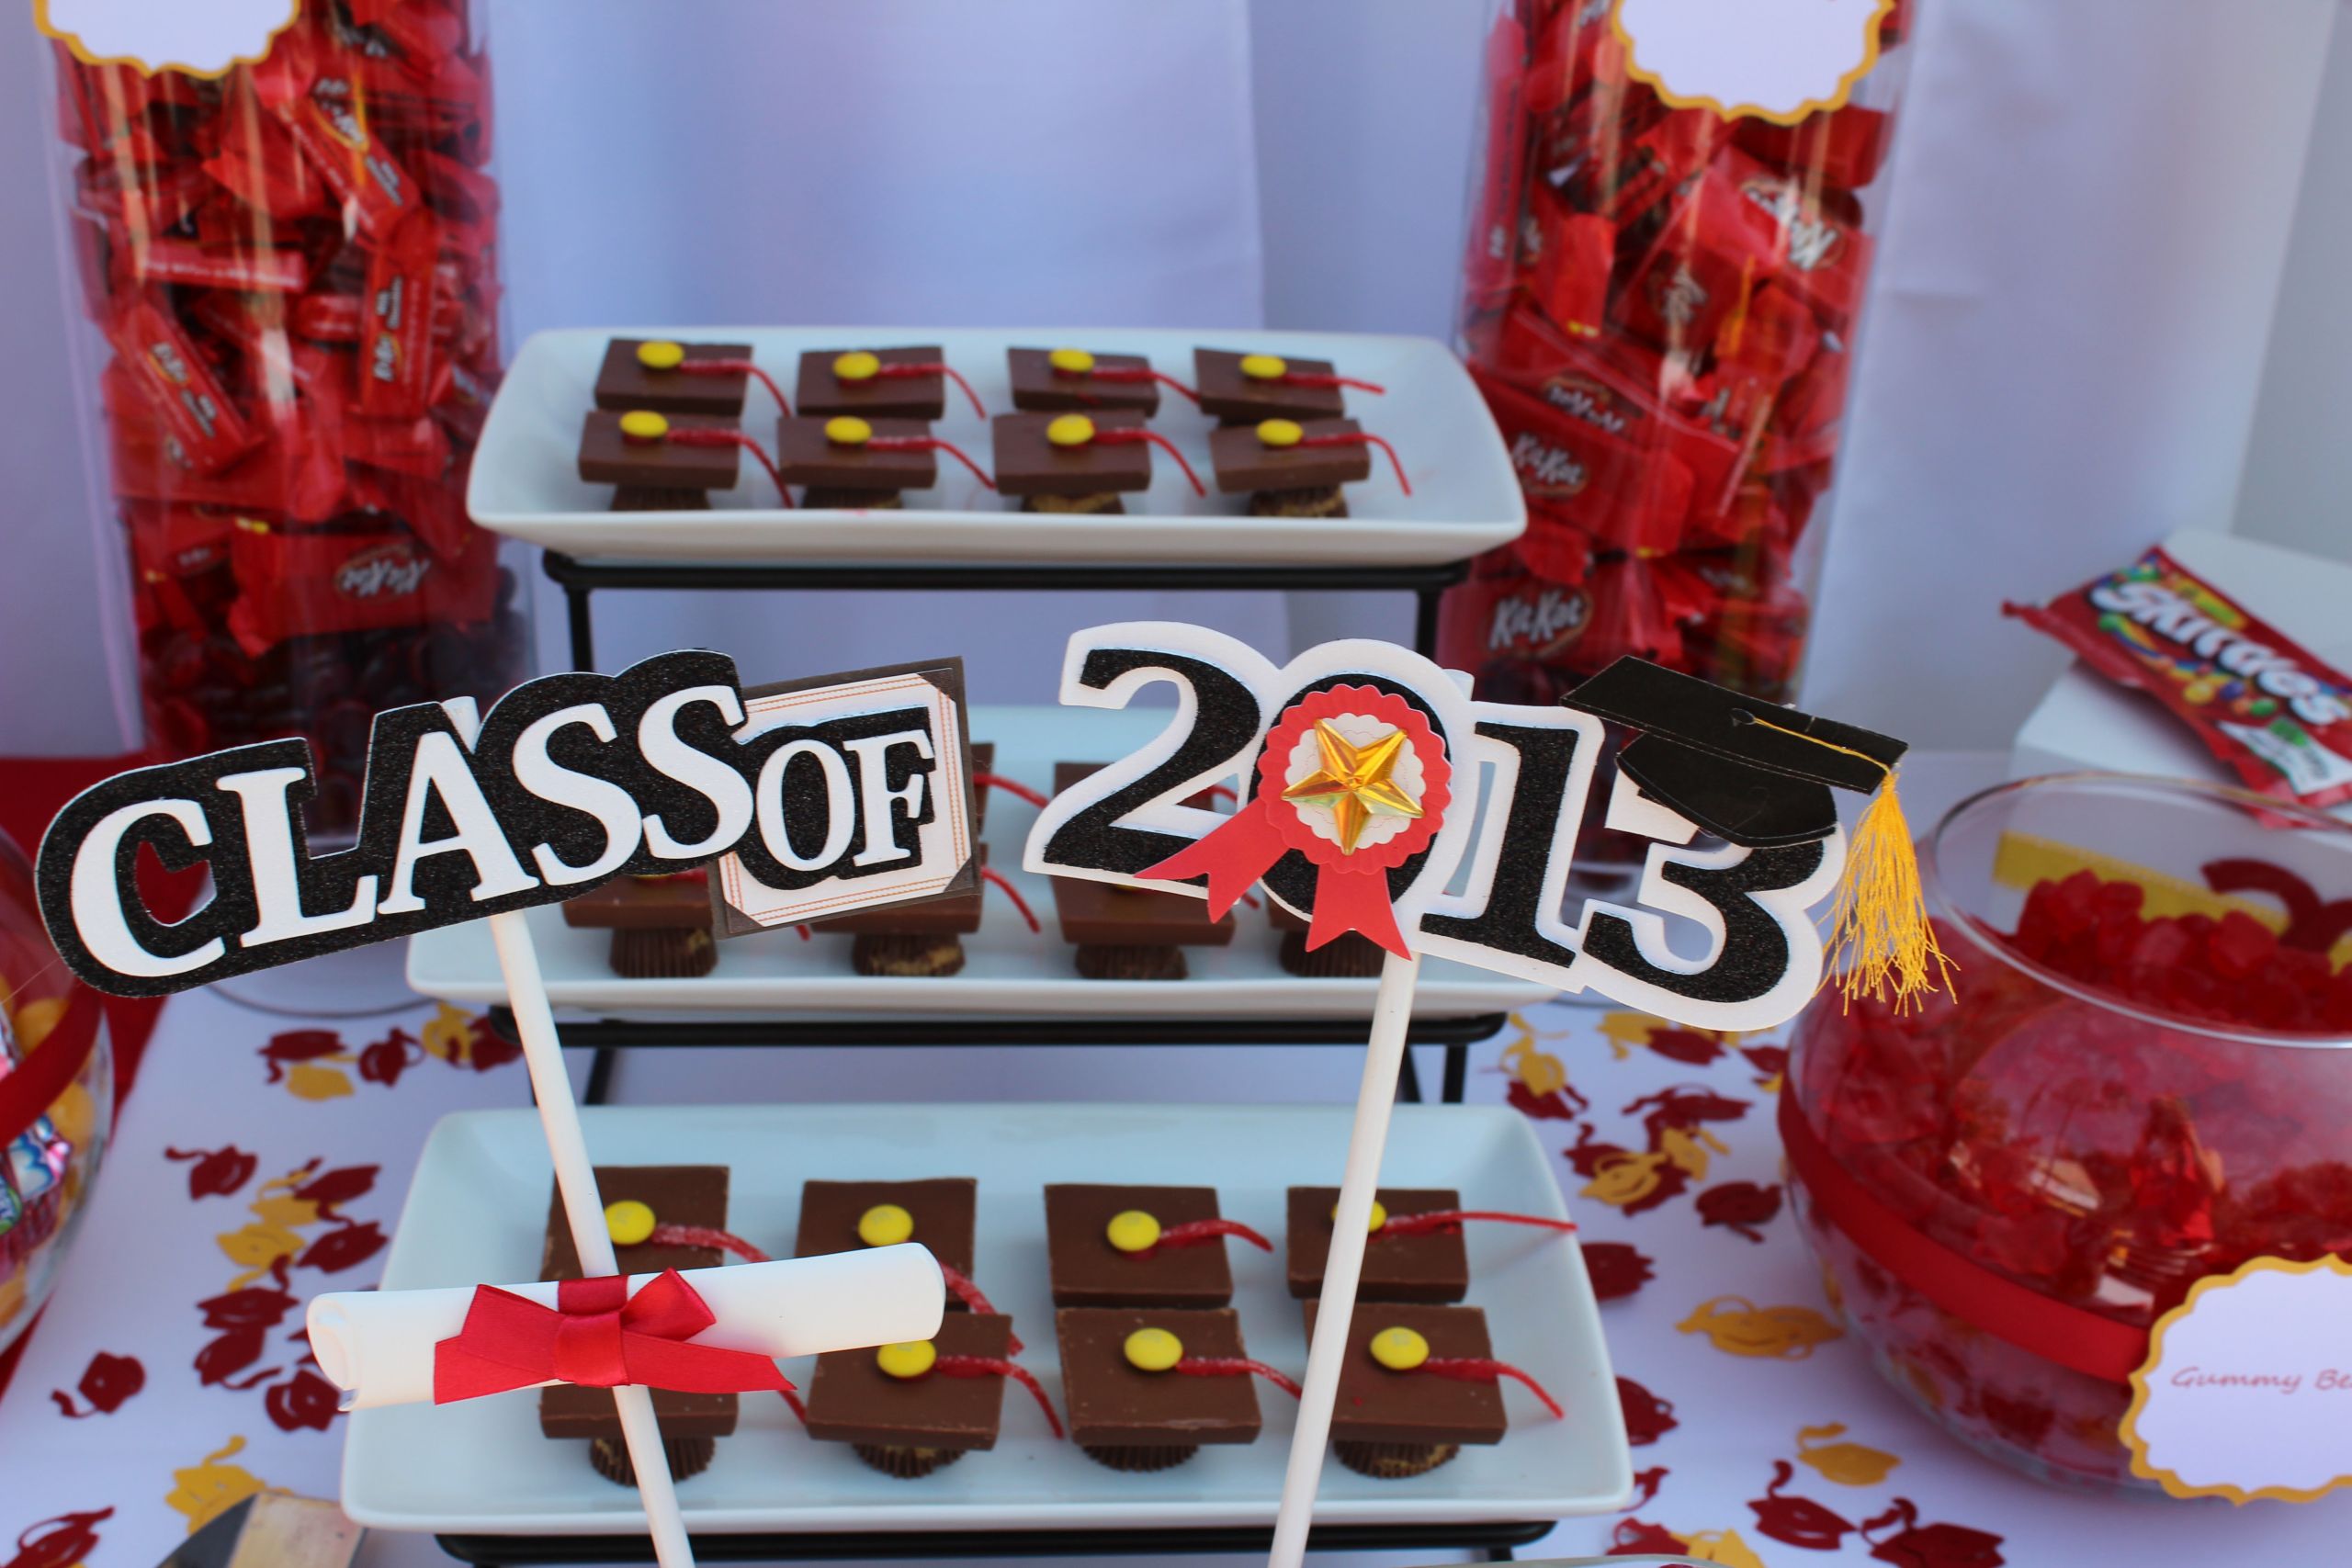 Candy Buffet Ideas For Graduation Party
 Nick’s Graduation Candy Buffet